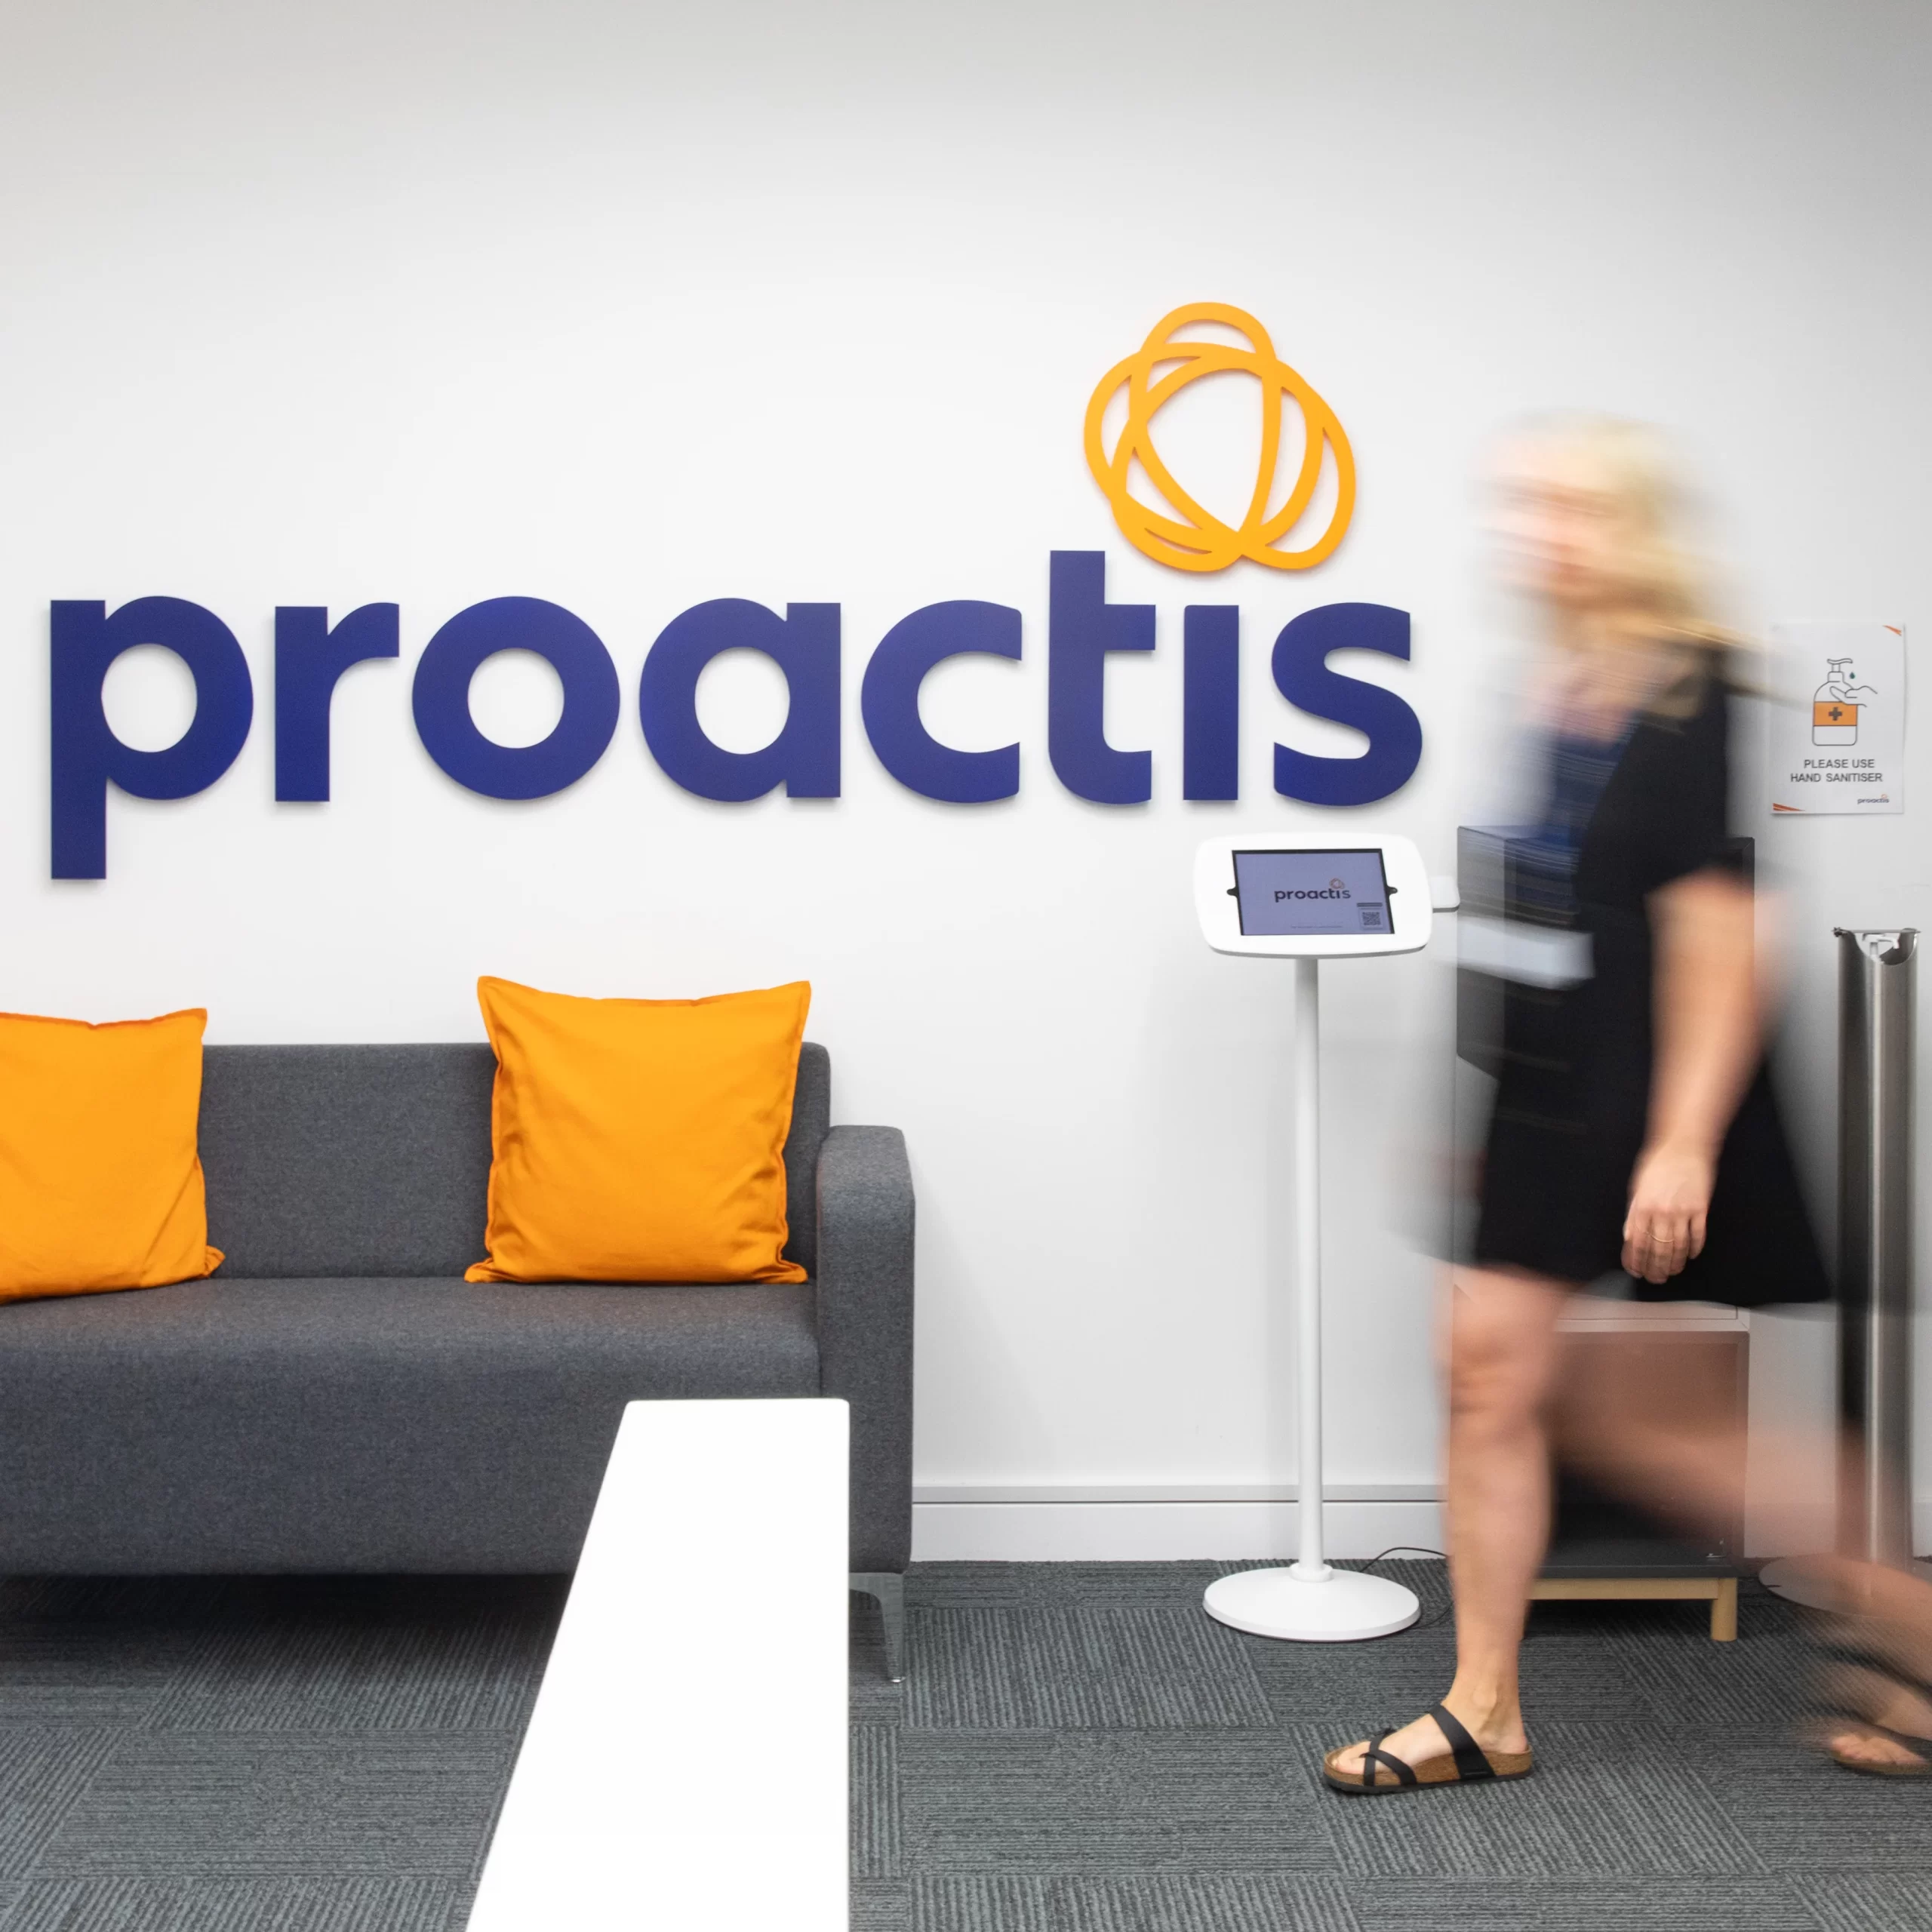 The Proactis Tenders Limited office